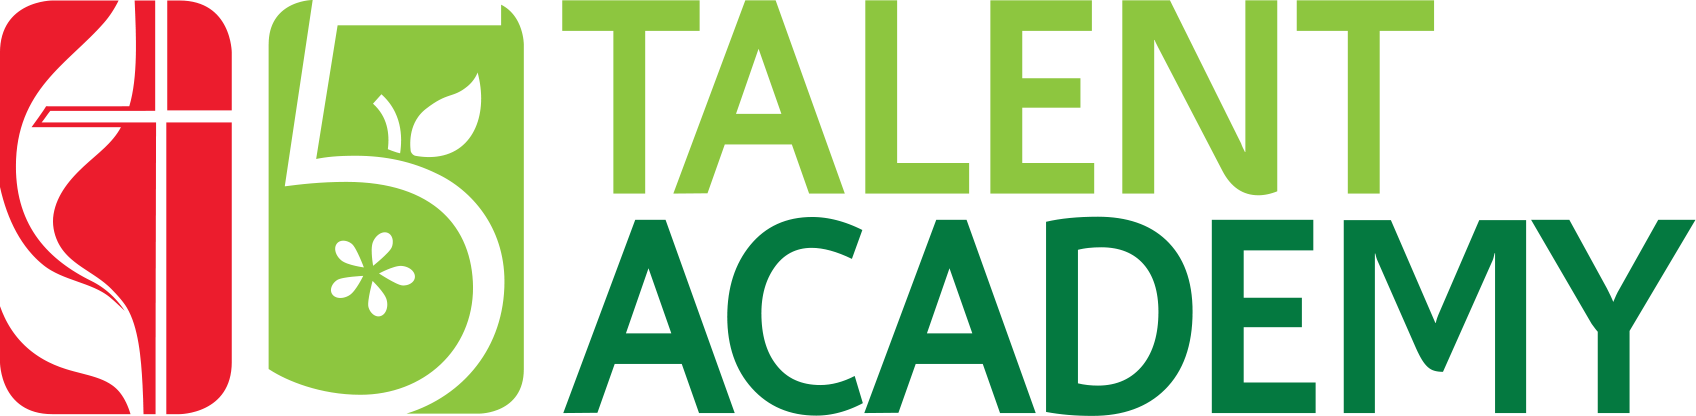 Registration Is Now Open For The 5 Talent Academy Event - 5 Talent Academy (1696x416)